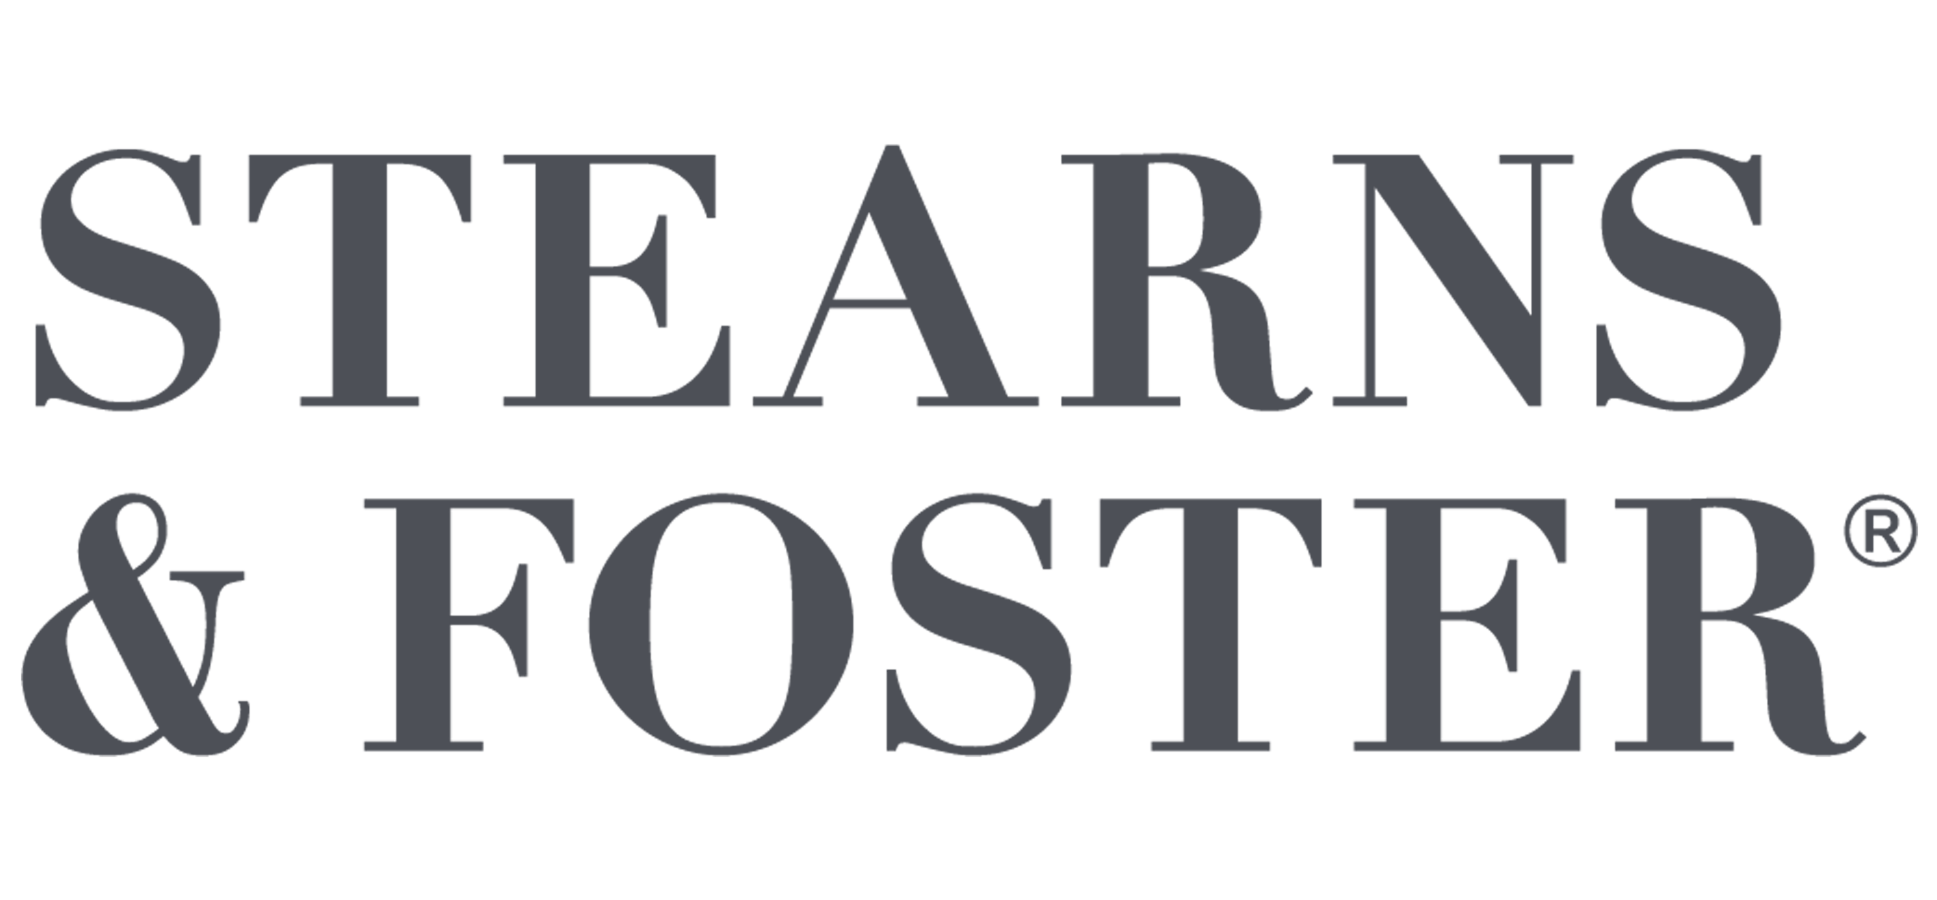 stearns and foster logo